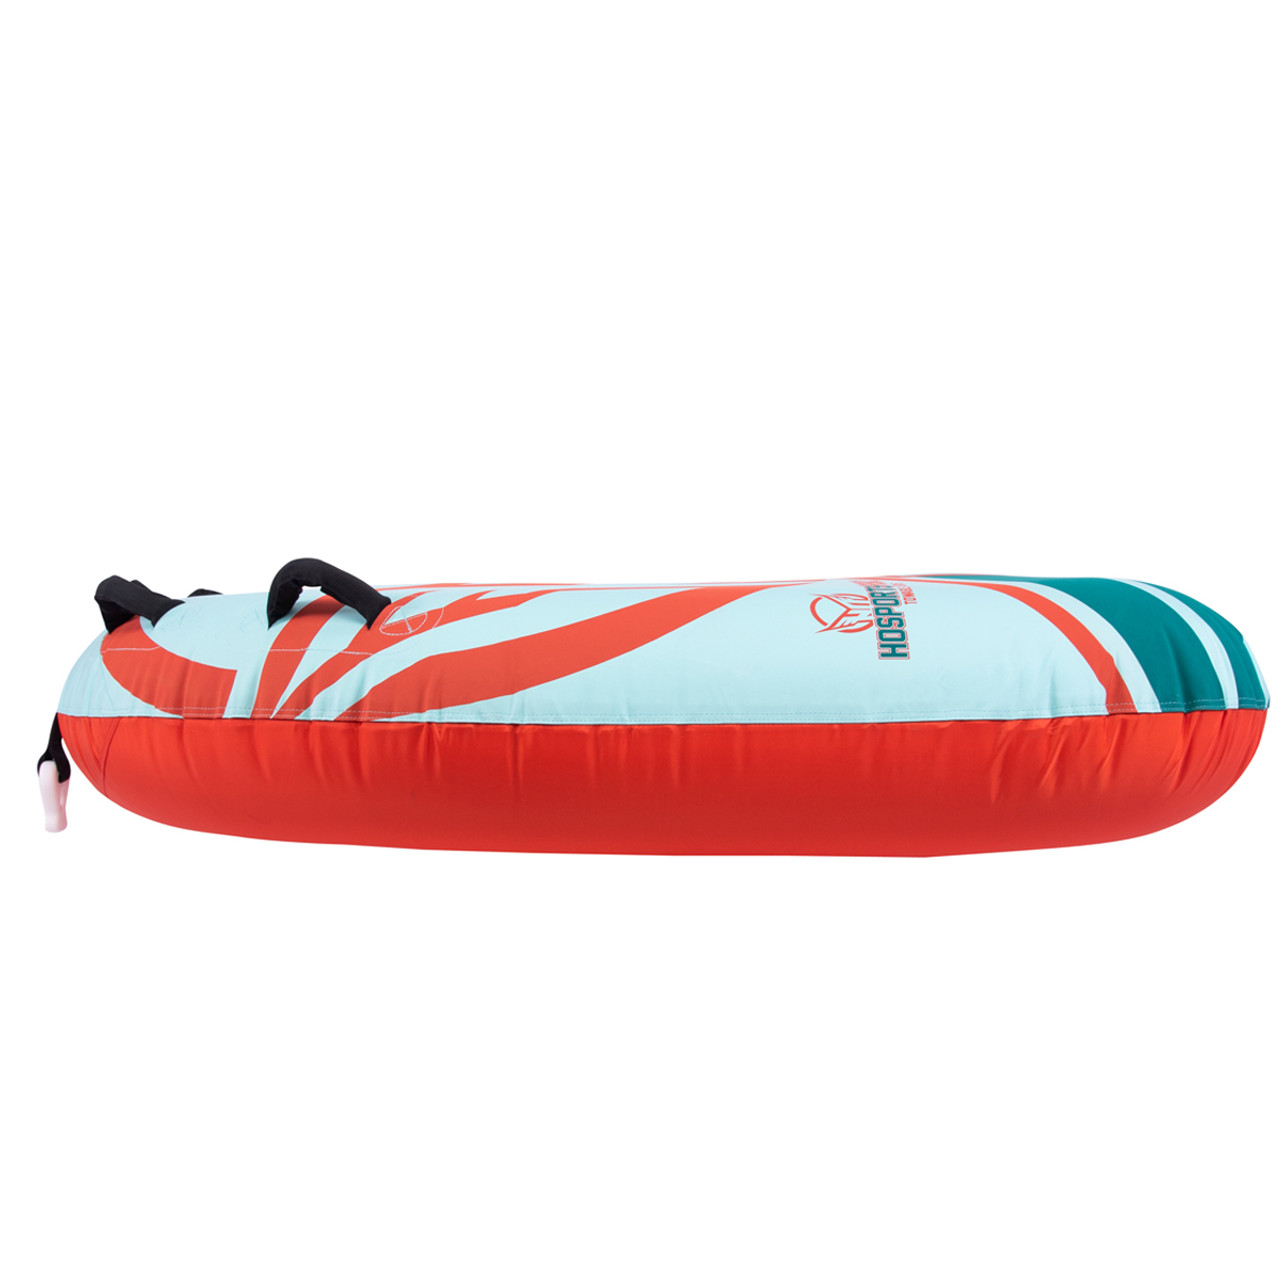 HO Sports Frenzy 2-Person Towable Tube Side Handles